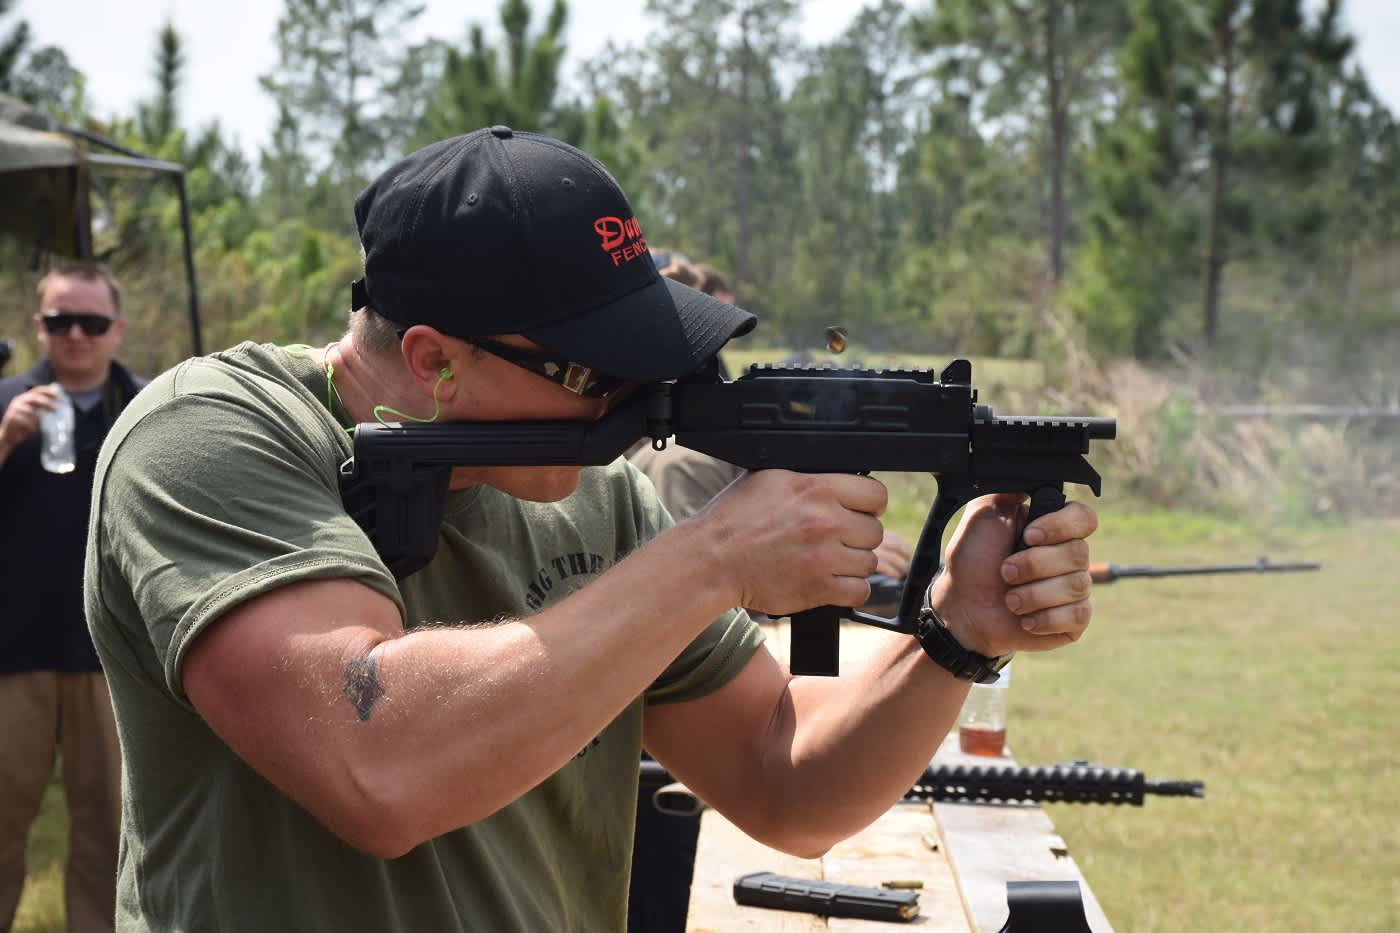 Photos: Hands-on with the IWI US Galil ACE and UZI PRO at Big 3 East